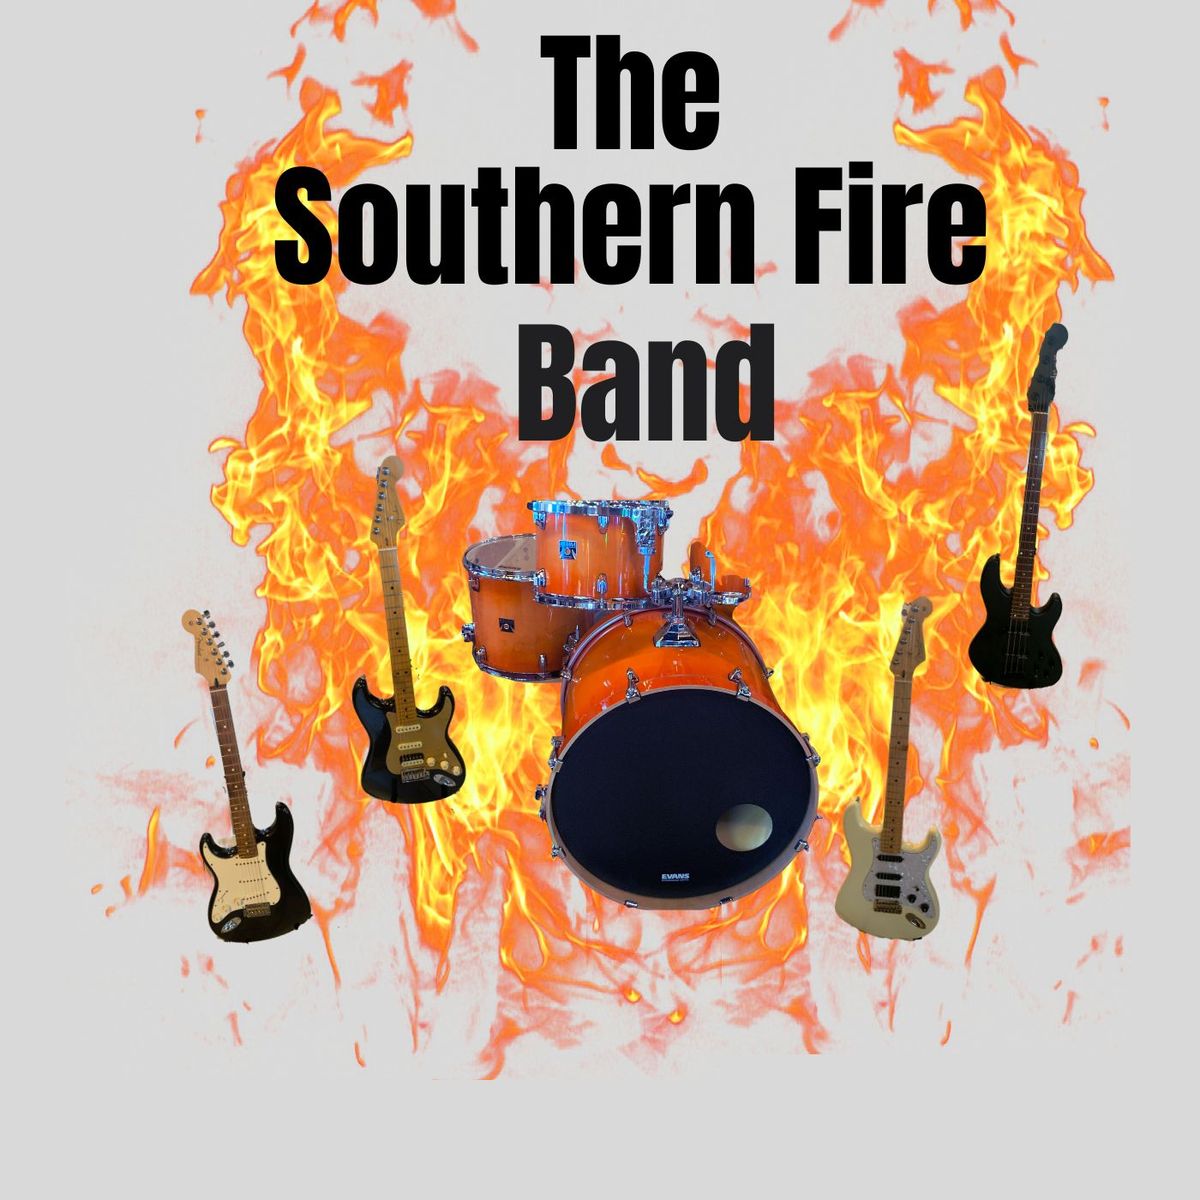 Southern Fire Band Live Performance - Hurricane's 